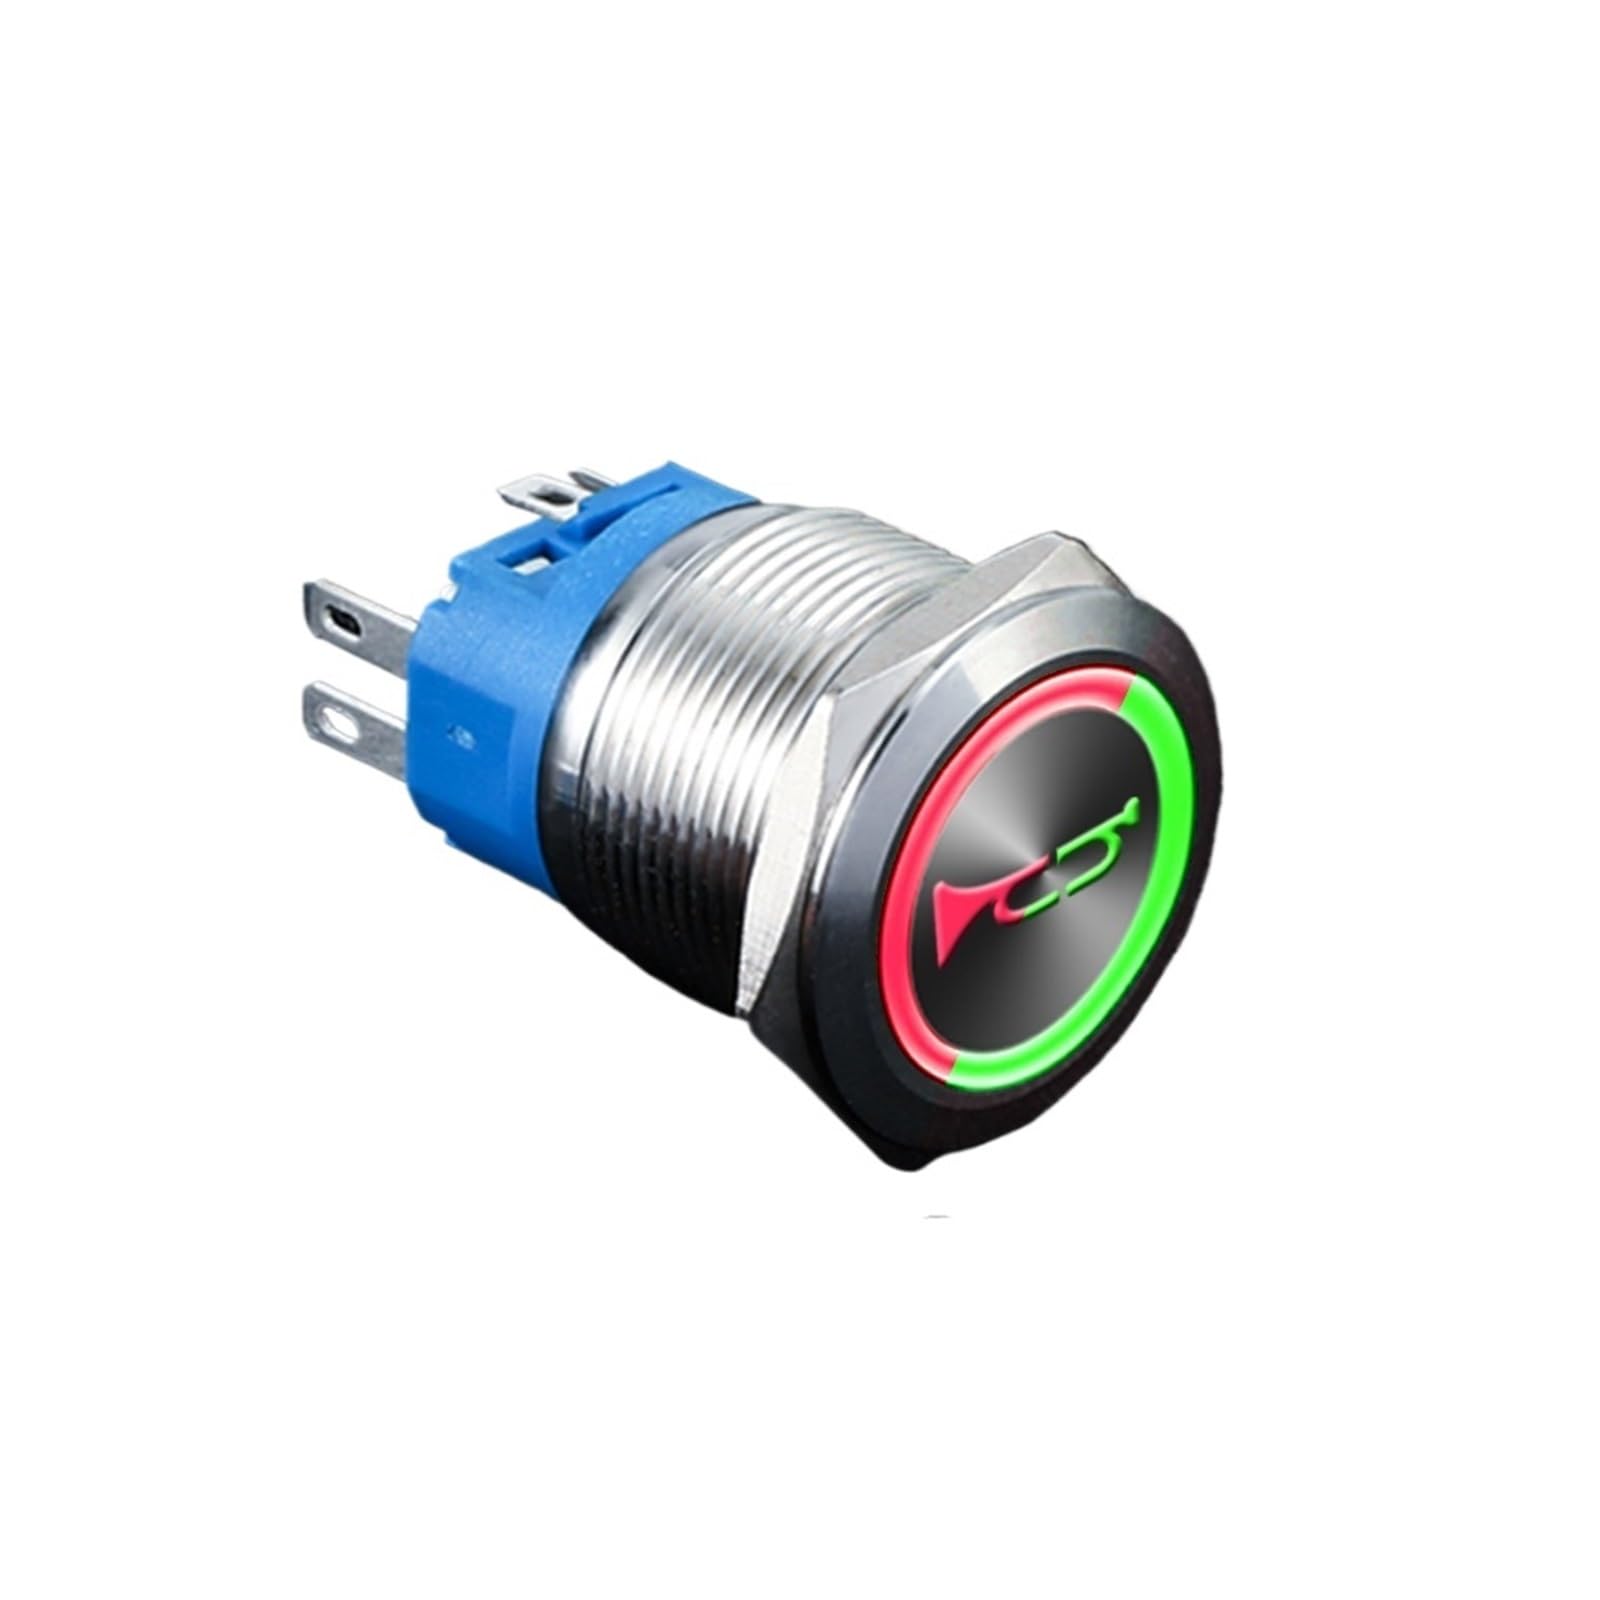 16/19/22MM Customized Two-color Metal Push Button Switch Waterproof LED Light Latching/Momentary Horn Fan for Car Boat 12V 24V ZMBMNNWQ(22MM,Red and Blue) von ZMBMNNWQ